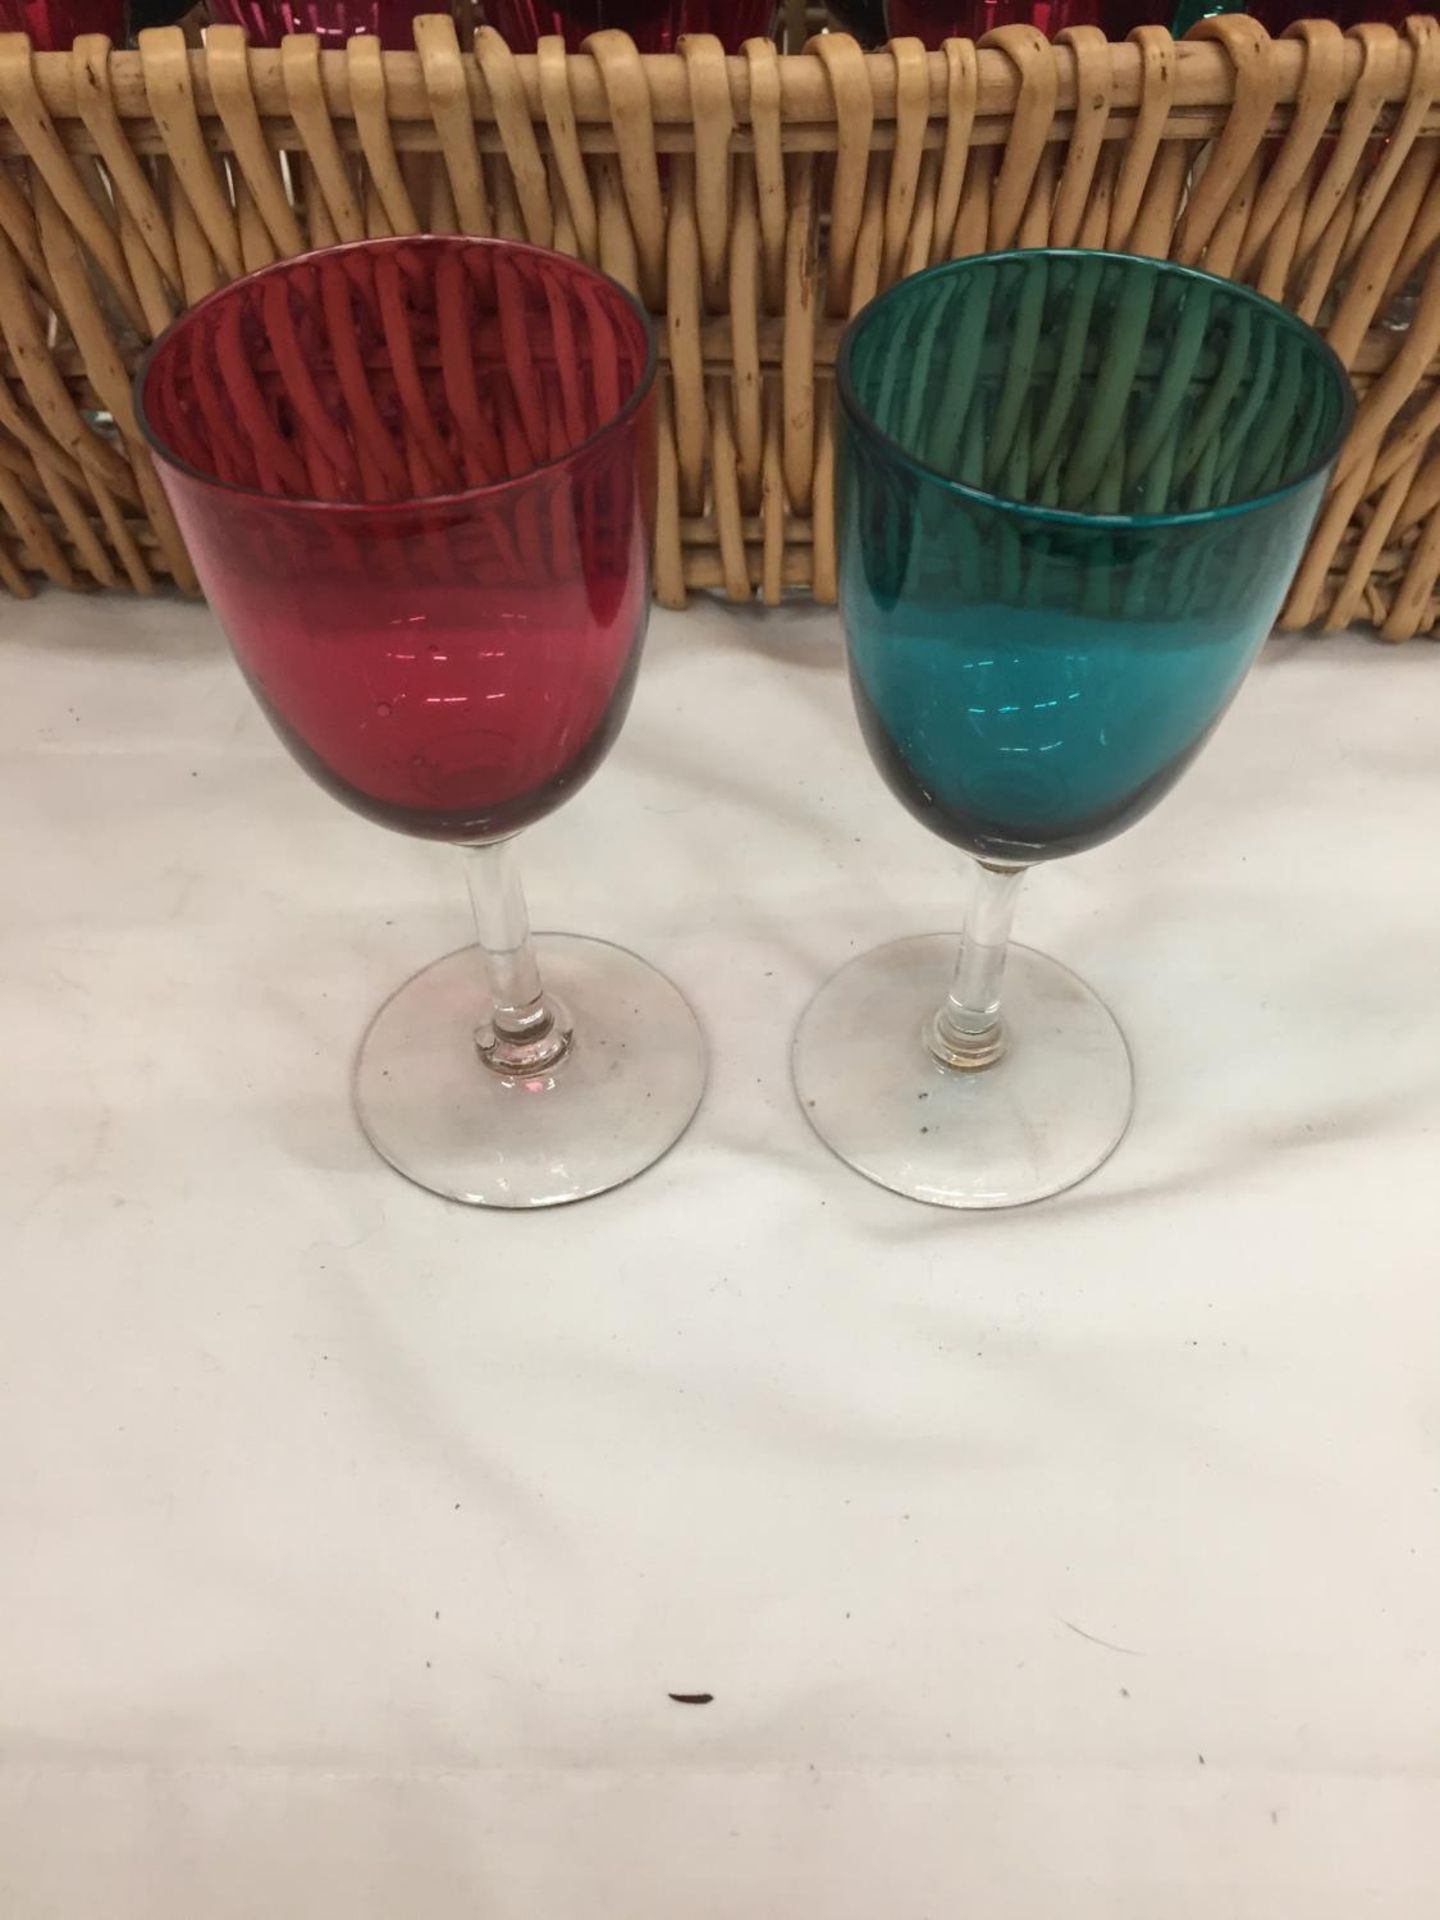 A WICKER BASKET CONTAINING FOURTEEN RED AND GREEN WINE GLASSES - Image 2 of 2